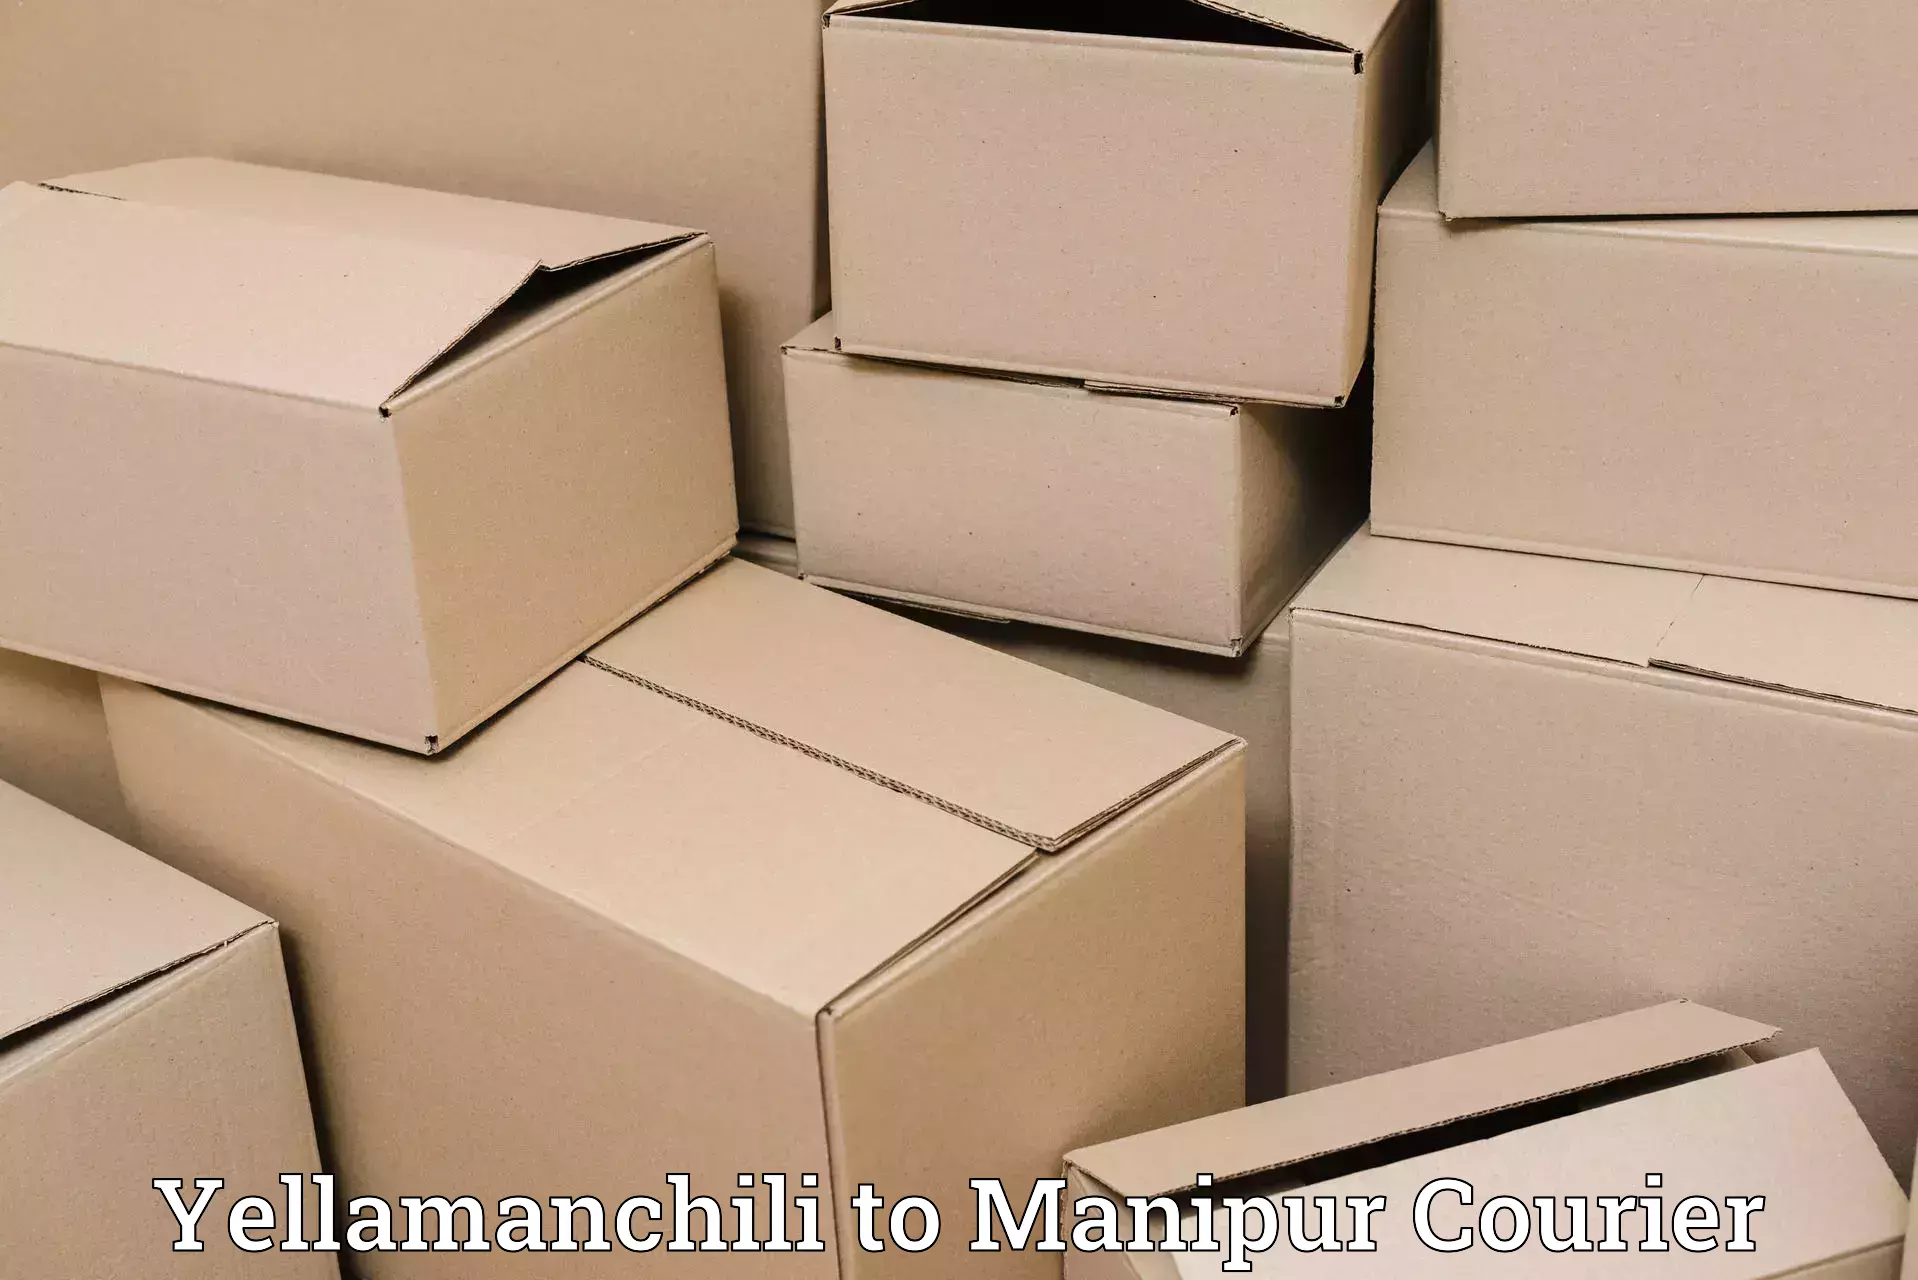 Luggage delivery providers Yellamanchili to Manipur